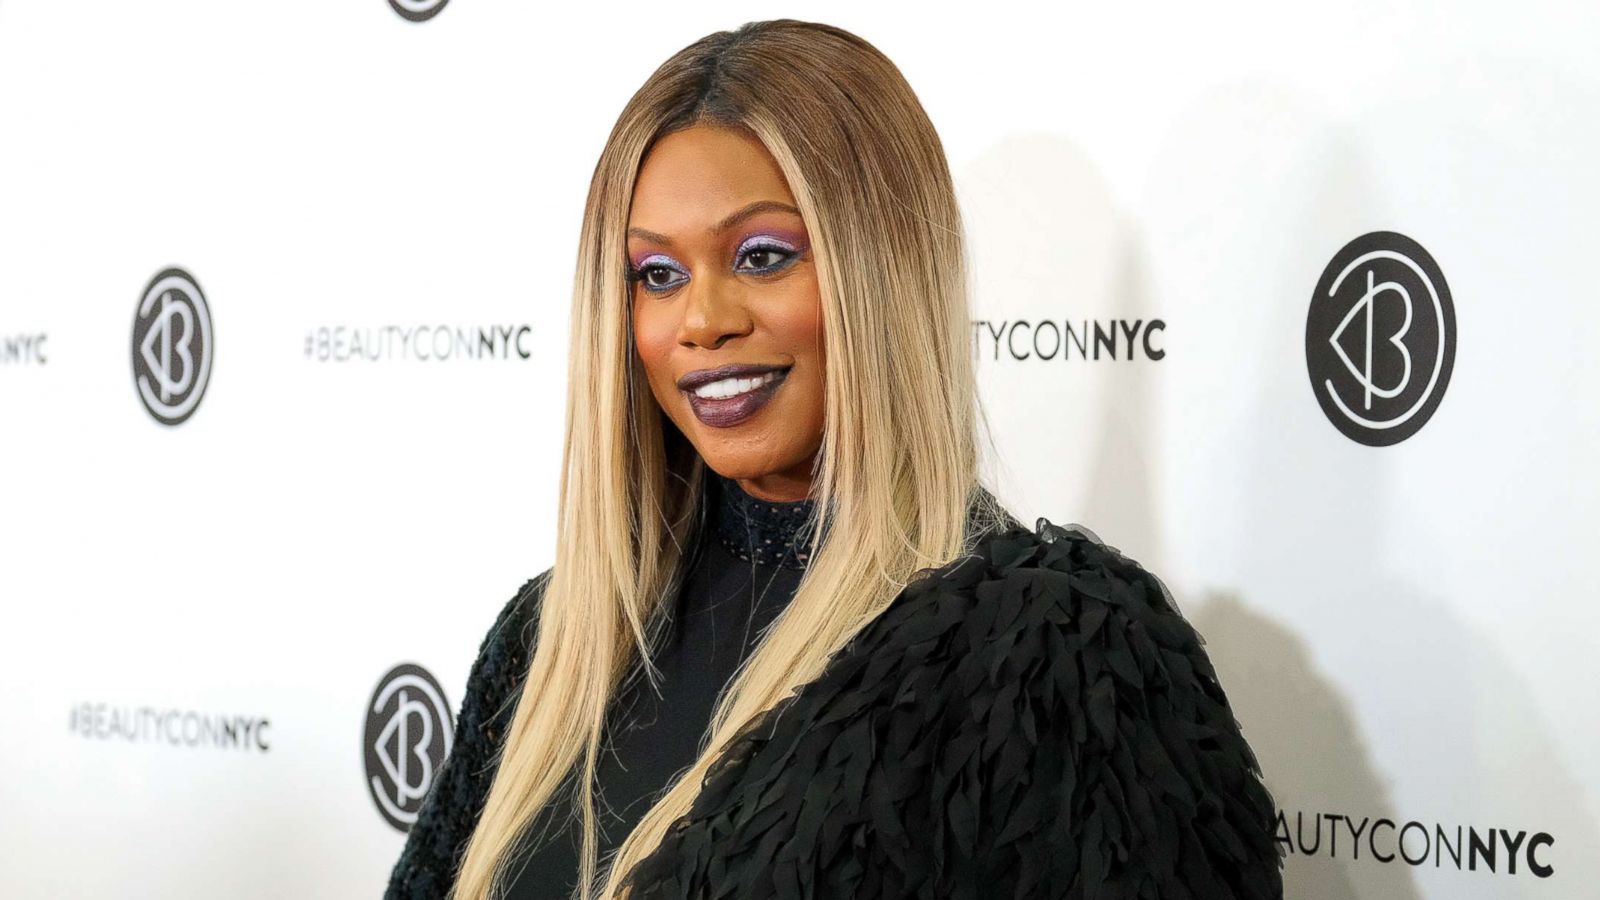 PHOTO: Laverne Cox attends Beautycon Festival NYC 2018 - Day 1 at Jacob Javits Center, April 21, 2018 in New York City.